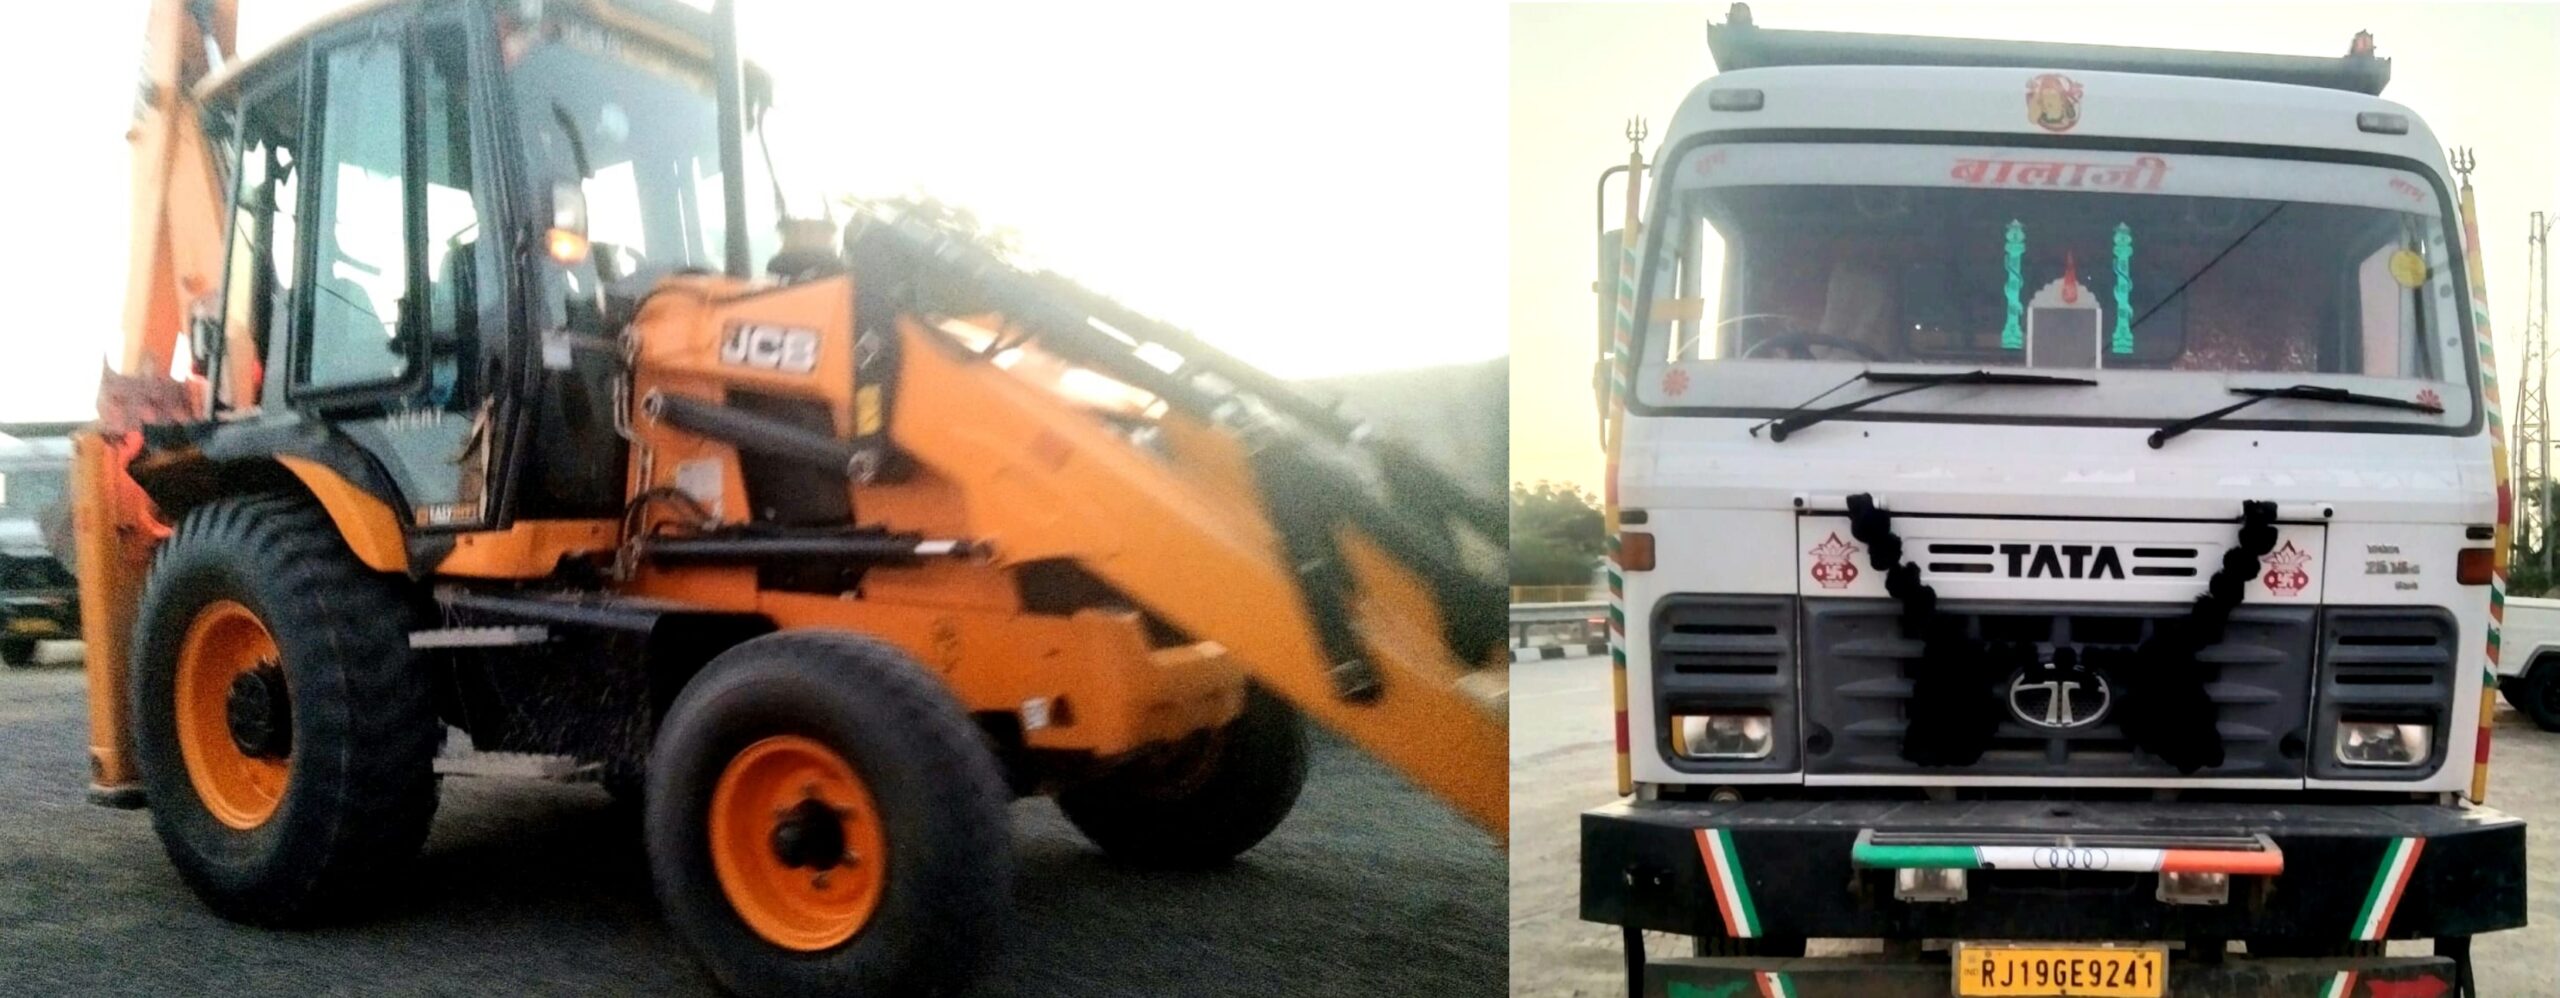 action-against-illegal-mining-jcb-and-dumper-seized